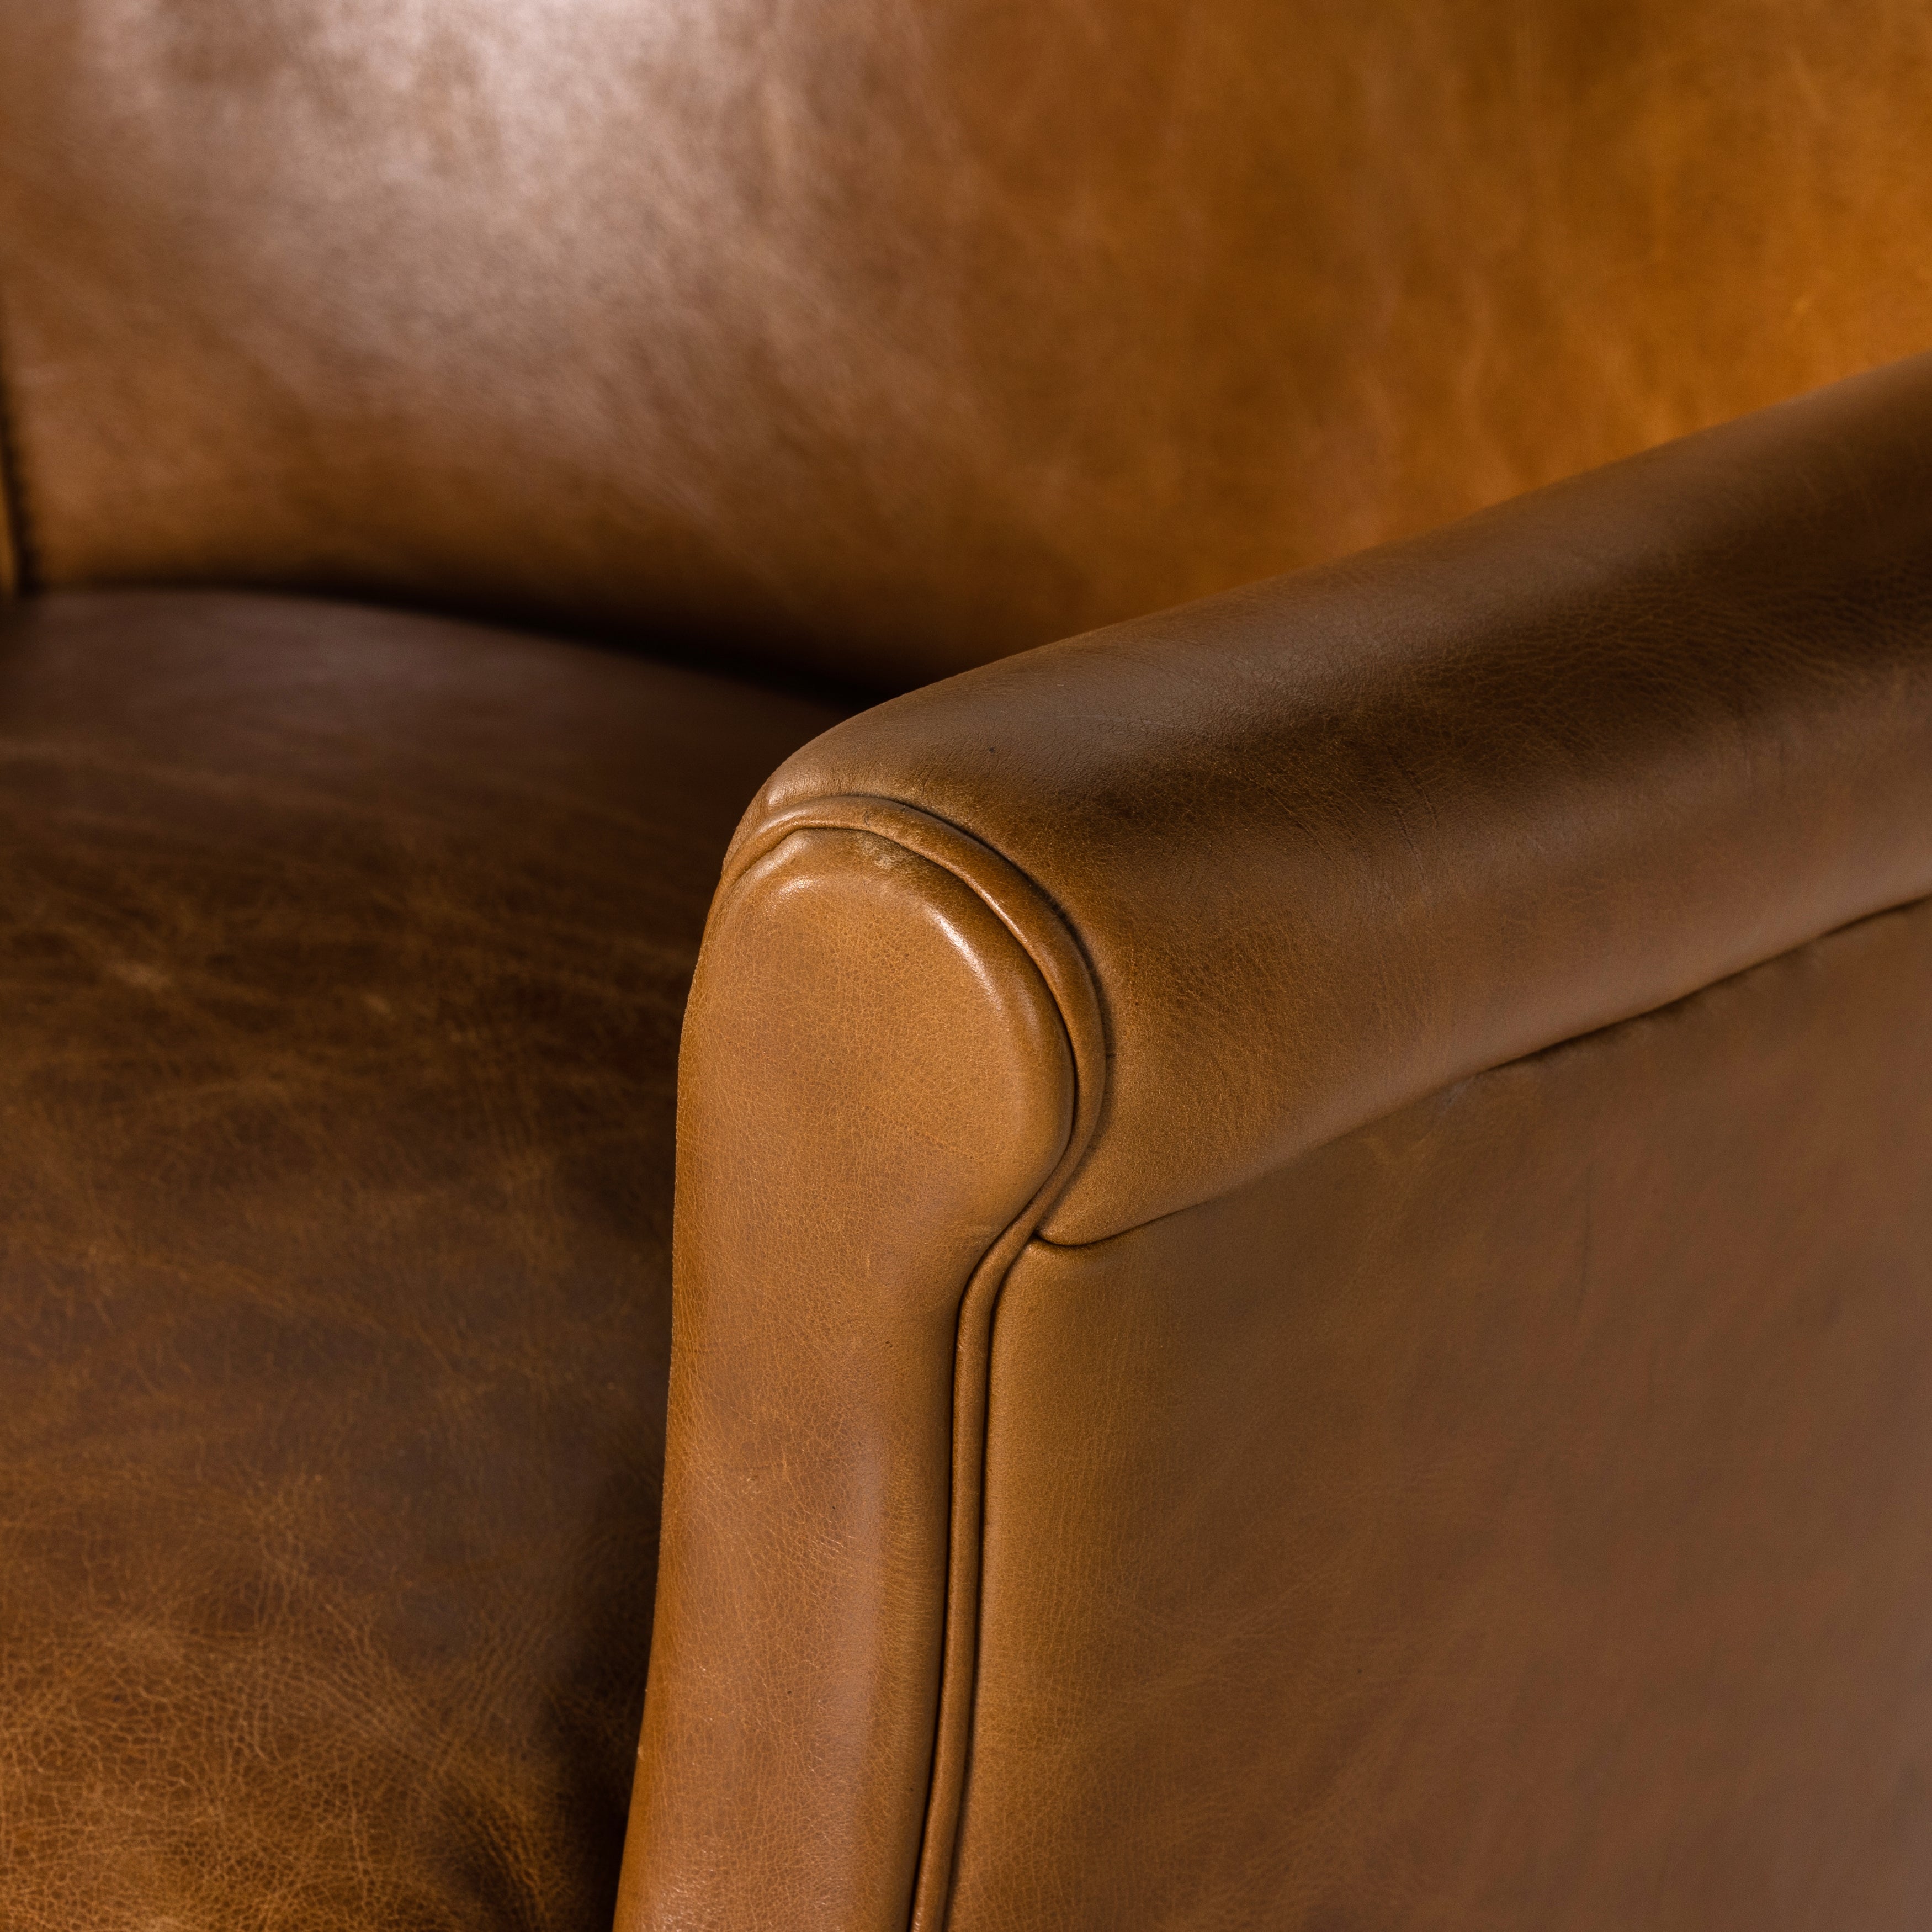 A statement seat all its own. This regal Parisian club chair is honored with a profound scooped back and rolled arms in classic, lived in tan top-grain leather. Amethyst Home provides interior design, new construction, custom furniture, and area rugs in the Des Moines metro area.